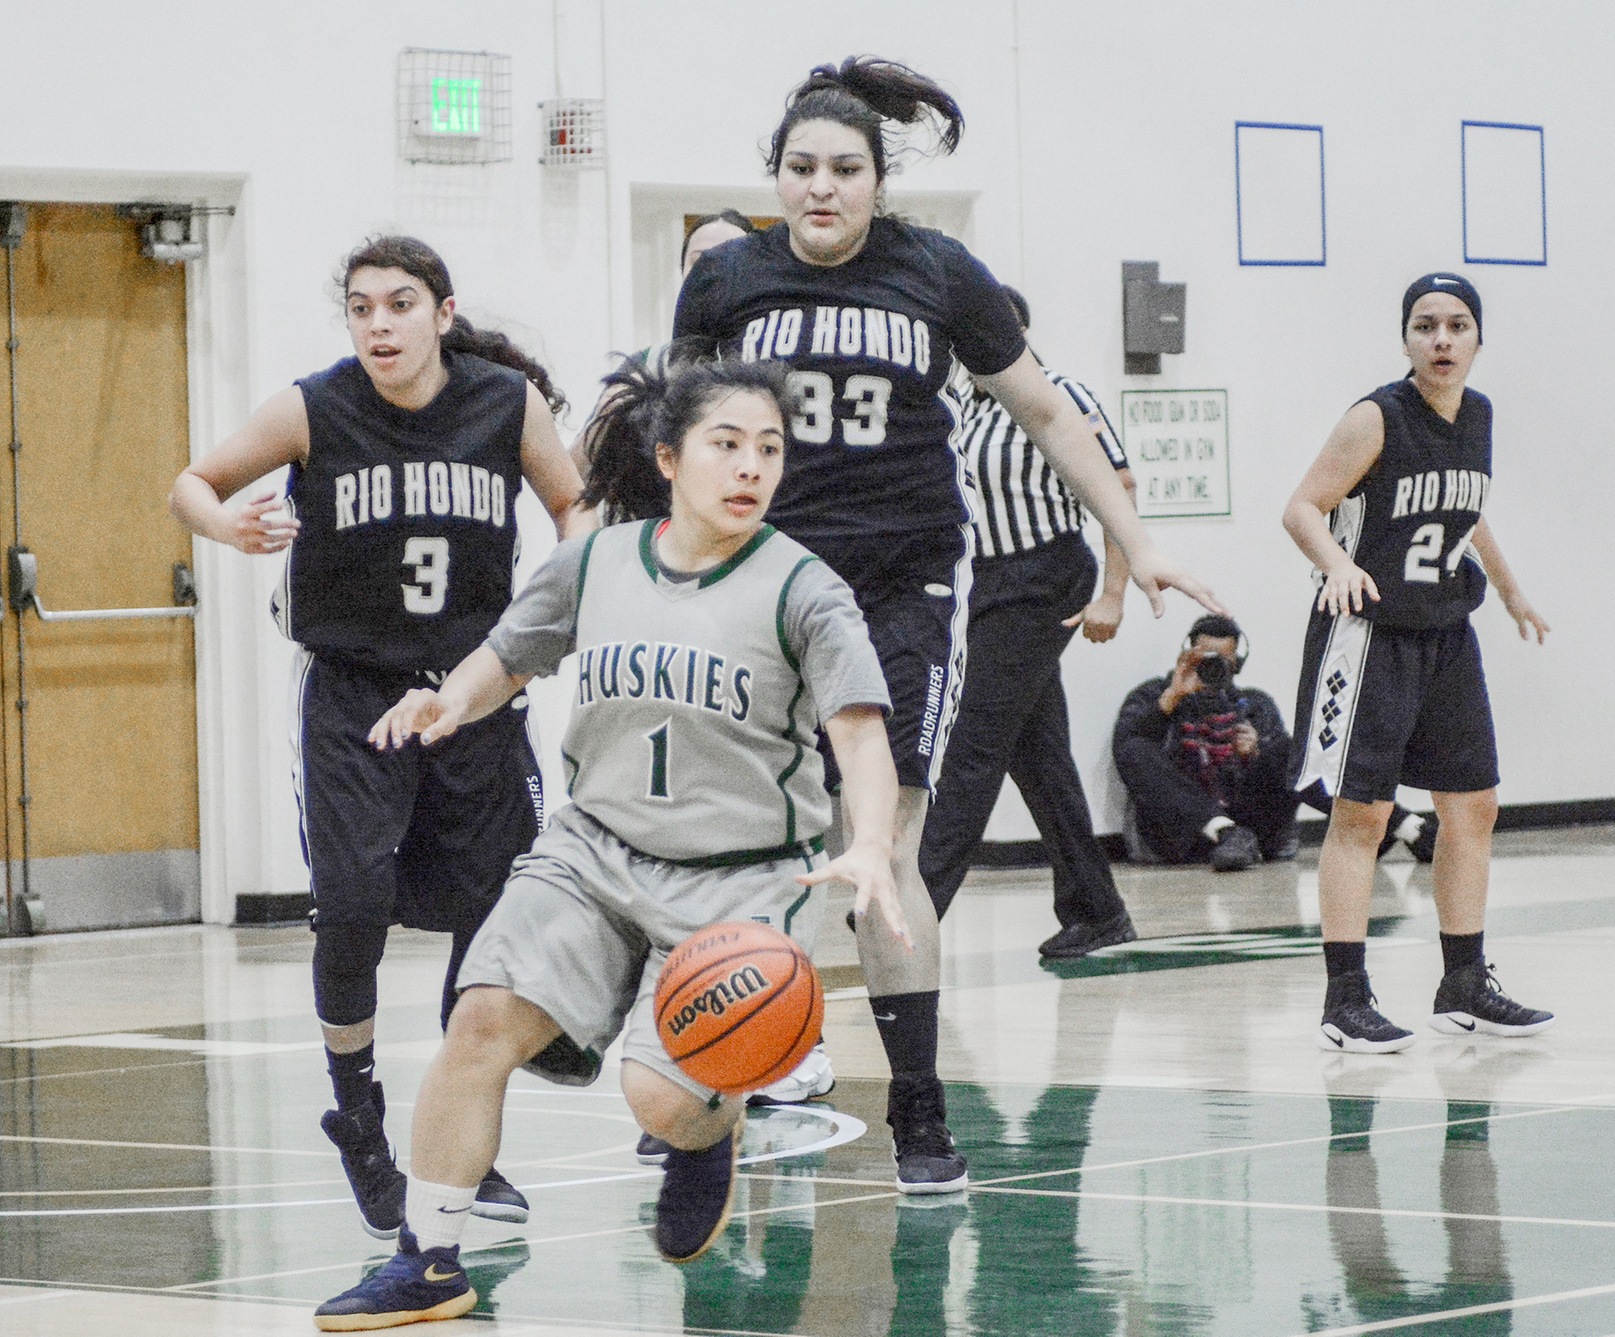 East Los Angeles freshman guard Farrah Castillo gets a rebound surrounded by taller Rio Hondo players in a 67-41 Husky win on Feb. 8. (Photo by Tadzio Garcia)